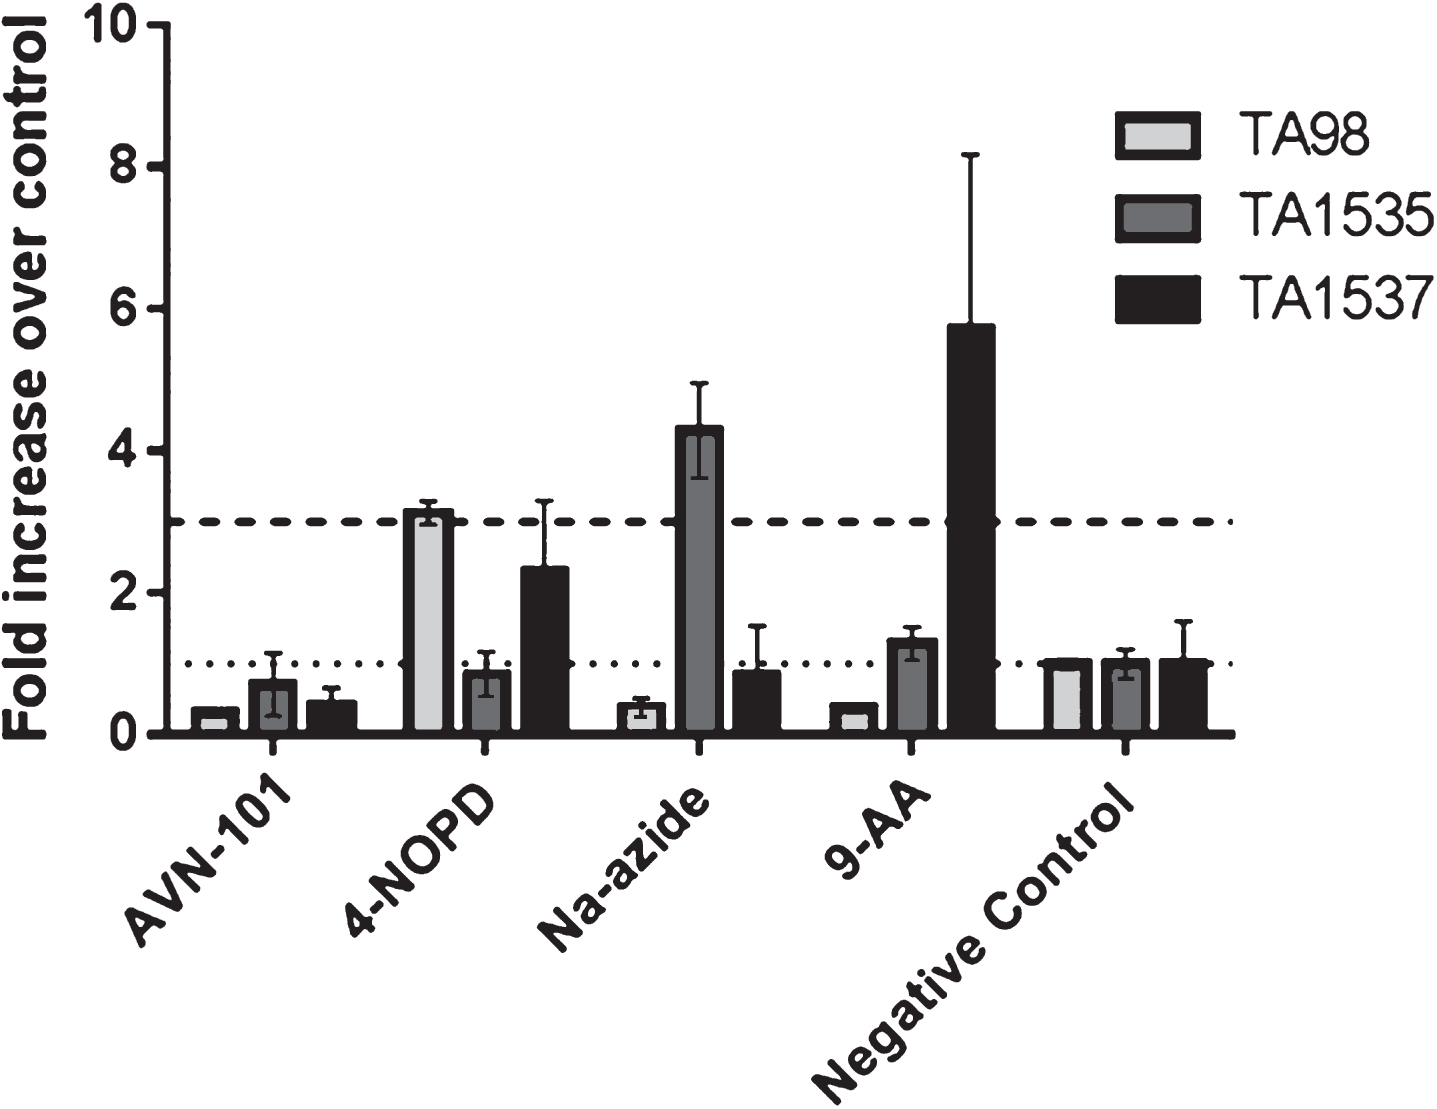 Effect of AVN-101 and control substances 
on reverse mutation rate (Ames test) of Salmonella typhimurium strains TA98 (light gray), TA1535 (dark 
gray), and TA1537 (black). Results for the highest AVN-101 concentration tested, 50μM, are shown. 
Positive controls for TA98 (4-NOPD), TA1535 (Na-azide), and TA1537 (9-AA), were tested at respective 
concentrations of 15μg/mL, 2μg/mL, and 50μg/mL. Effects of the compounds are presented as 
a fold increase over negative control, non-treated bacteria cultures (mean ± SE). Dotted line shows 
negative control level and dashed line represents the 3-fold threshold that is considered as a significant level 
for mutagenic effect.